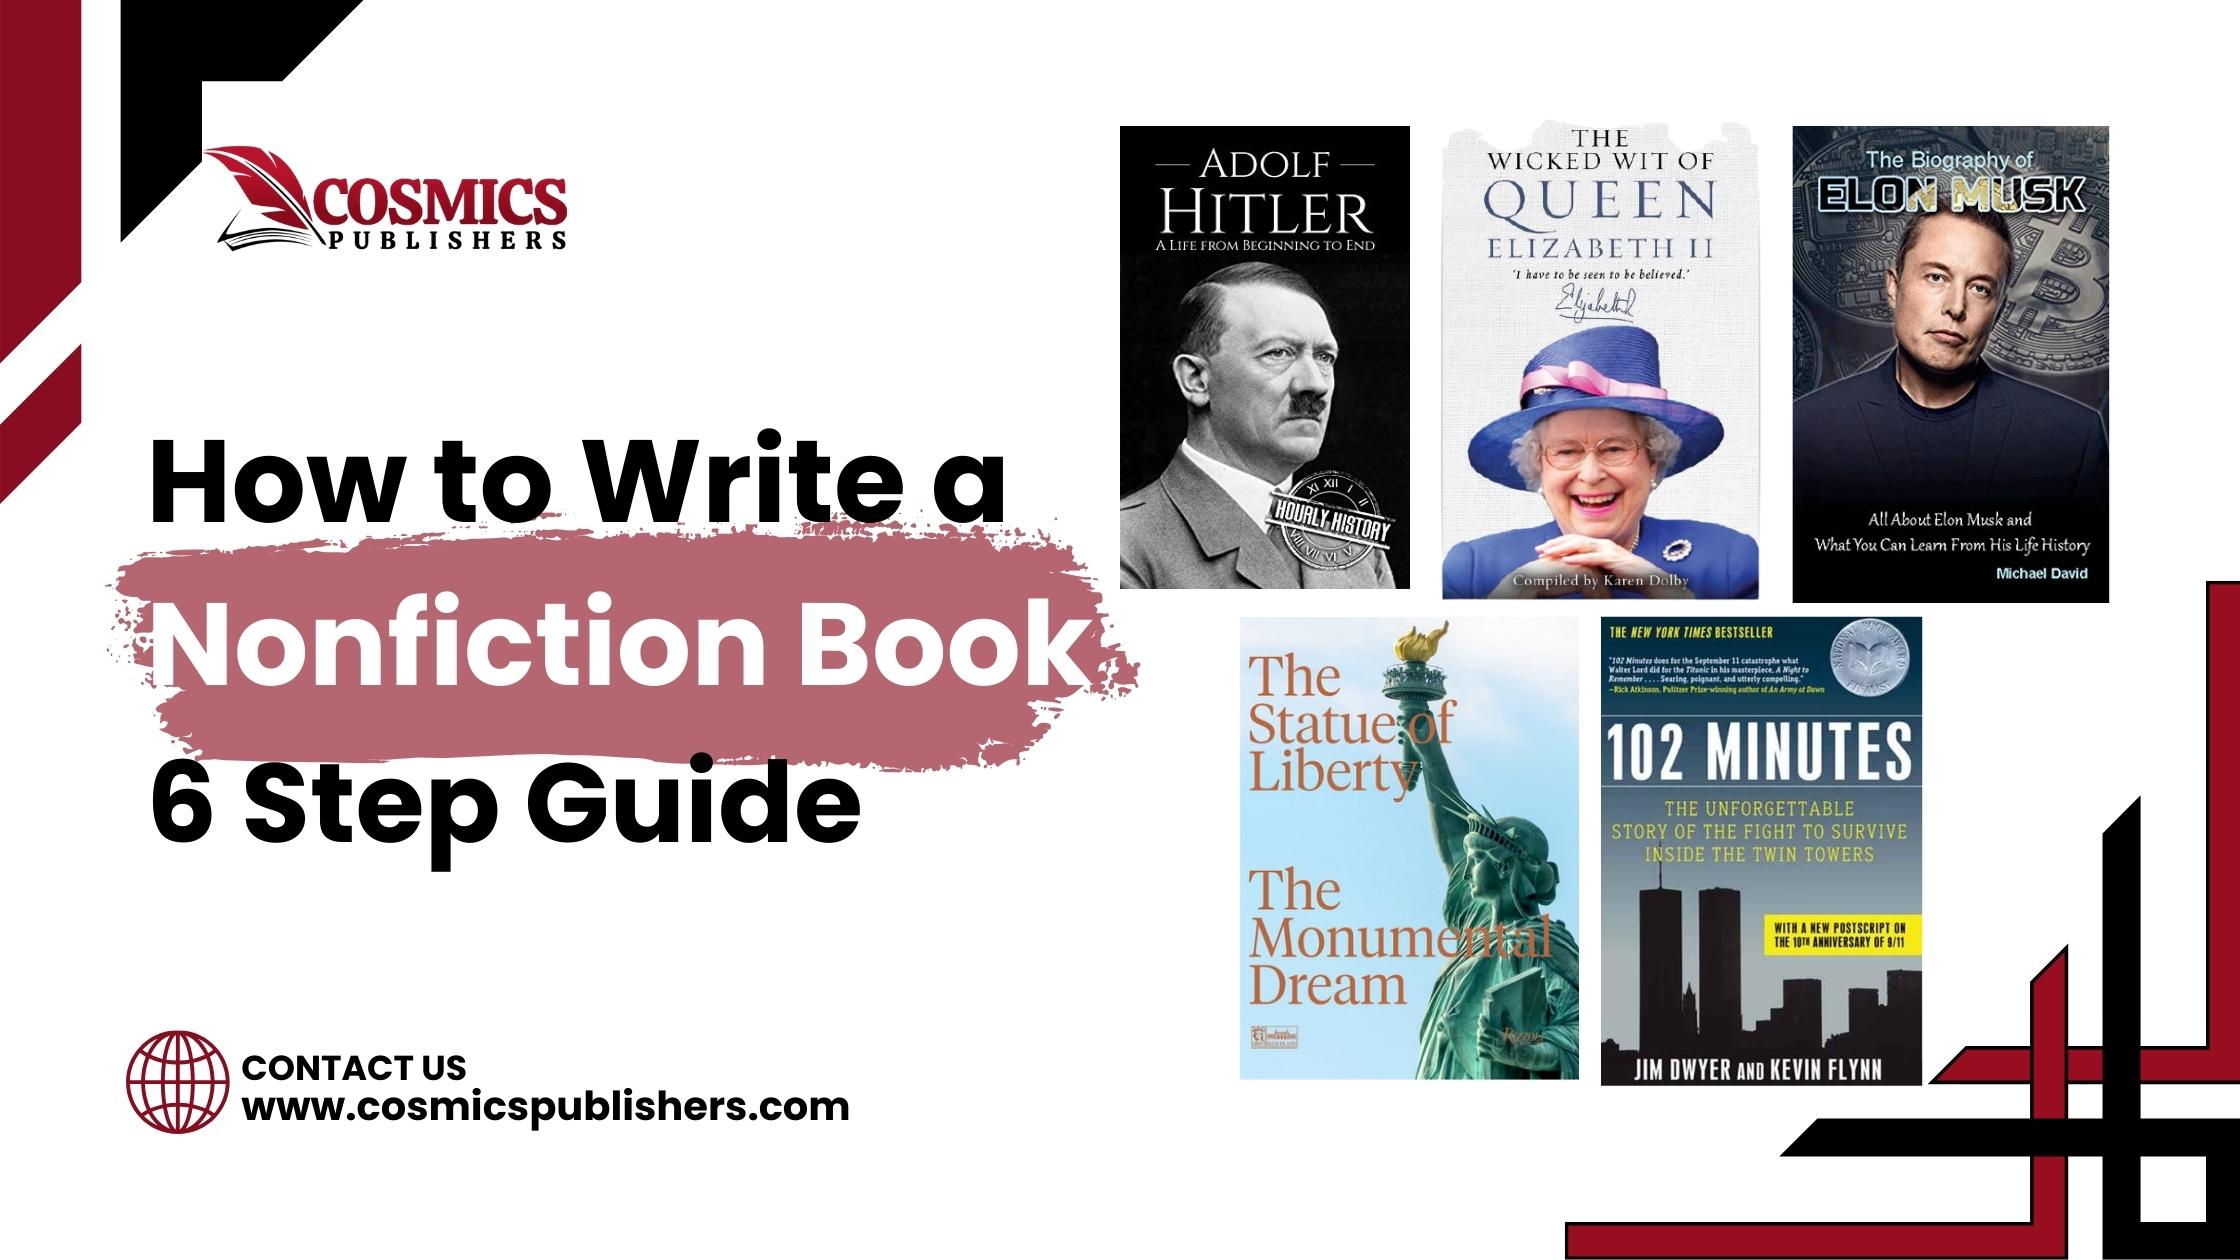 How to Write a Nonfiction Book: 6 Step Guide